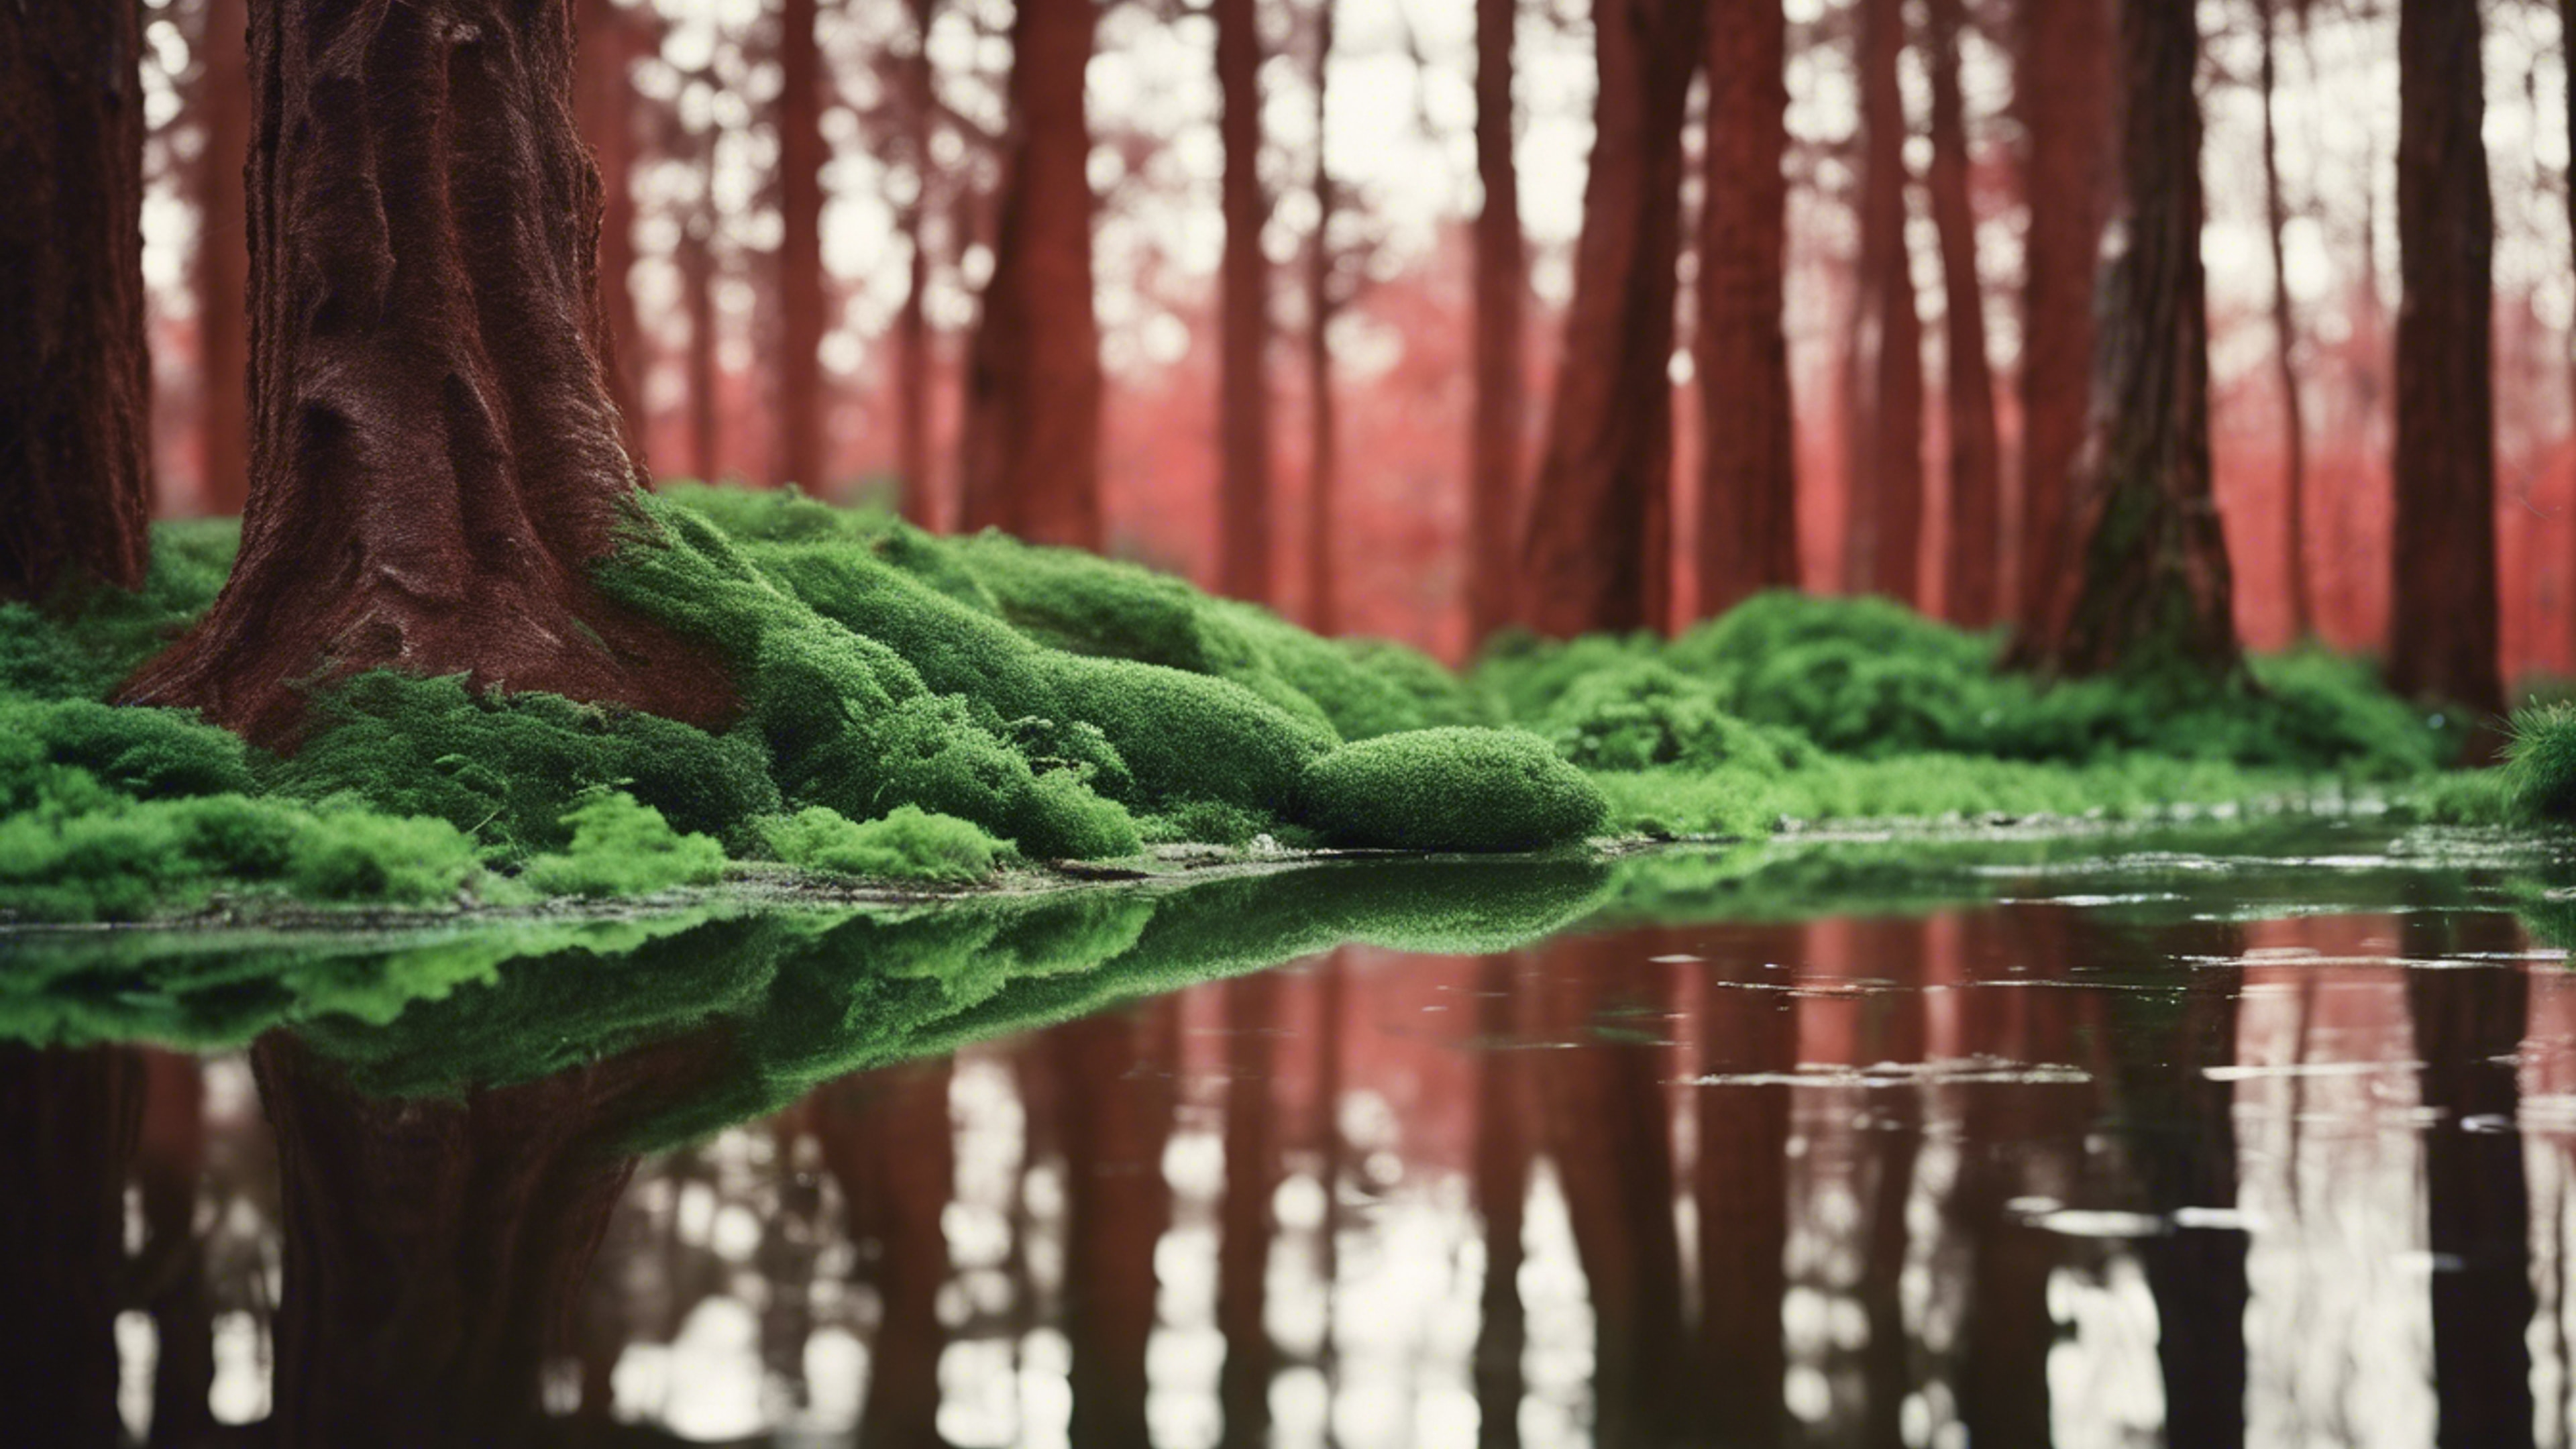 Lush, green forest reflections on a shiny, red leather surface. Шпалери[6f4e1618f75b40719461]